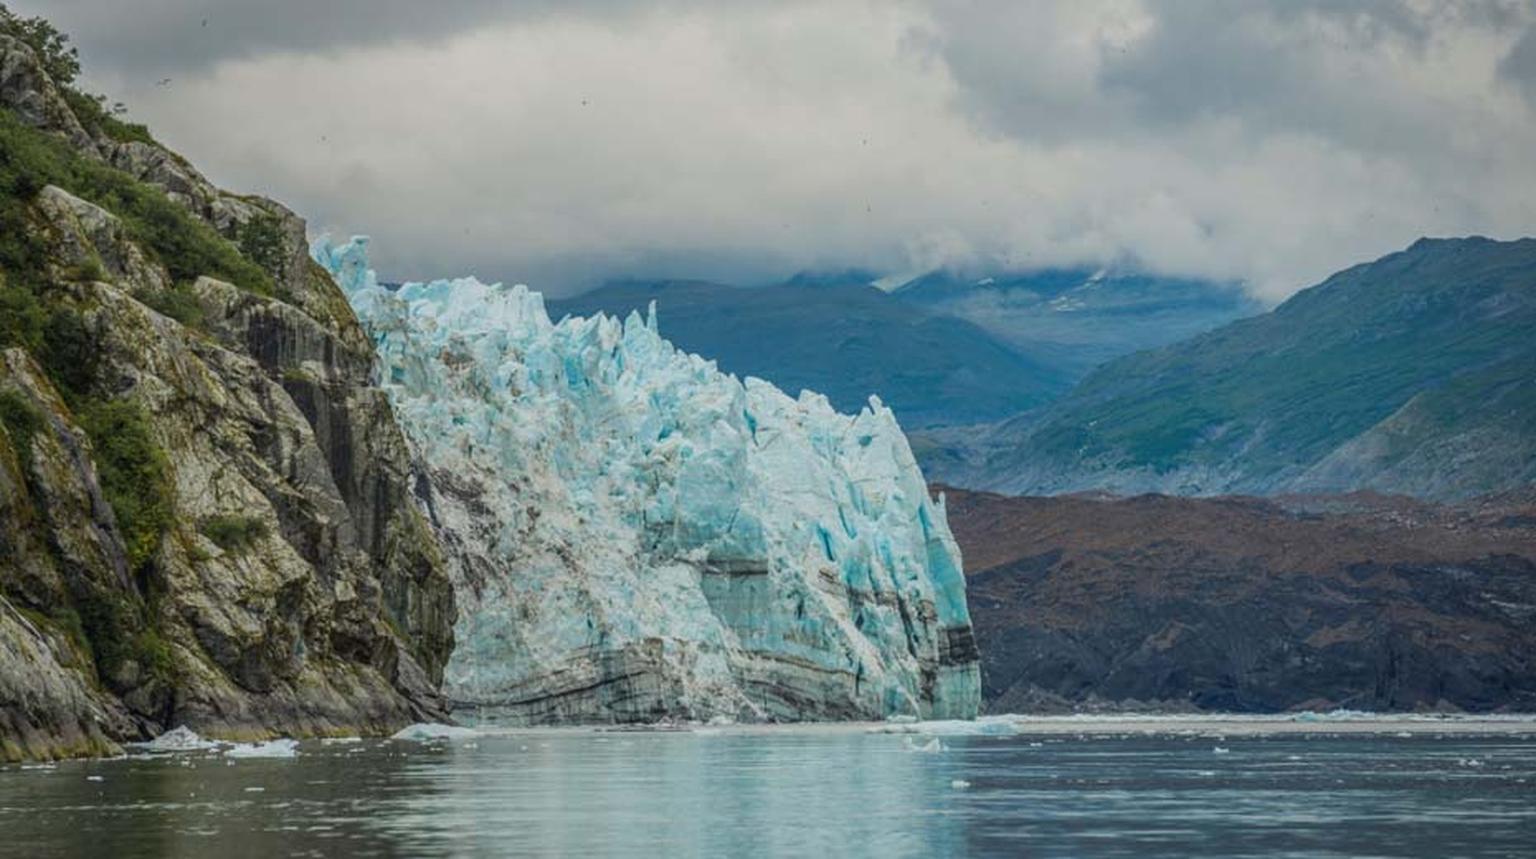 As Scott Gende, senior scientific advisor of Glacier Bay, explains: “The scientific research conducted here is of the utmost importance. The zone was declared an American national monument in 1925 due to the unique possibility it affords of studying the s